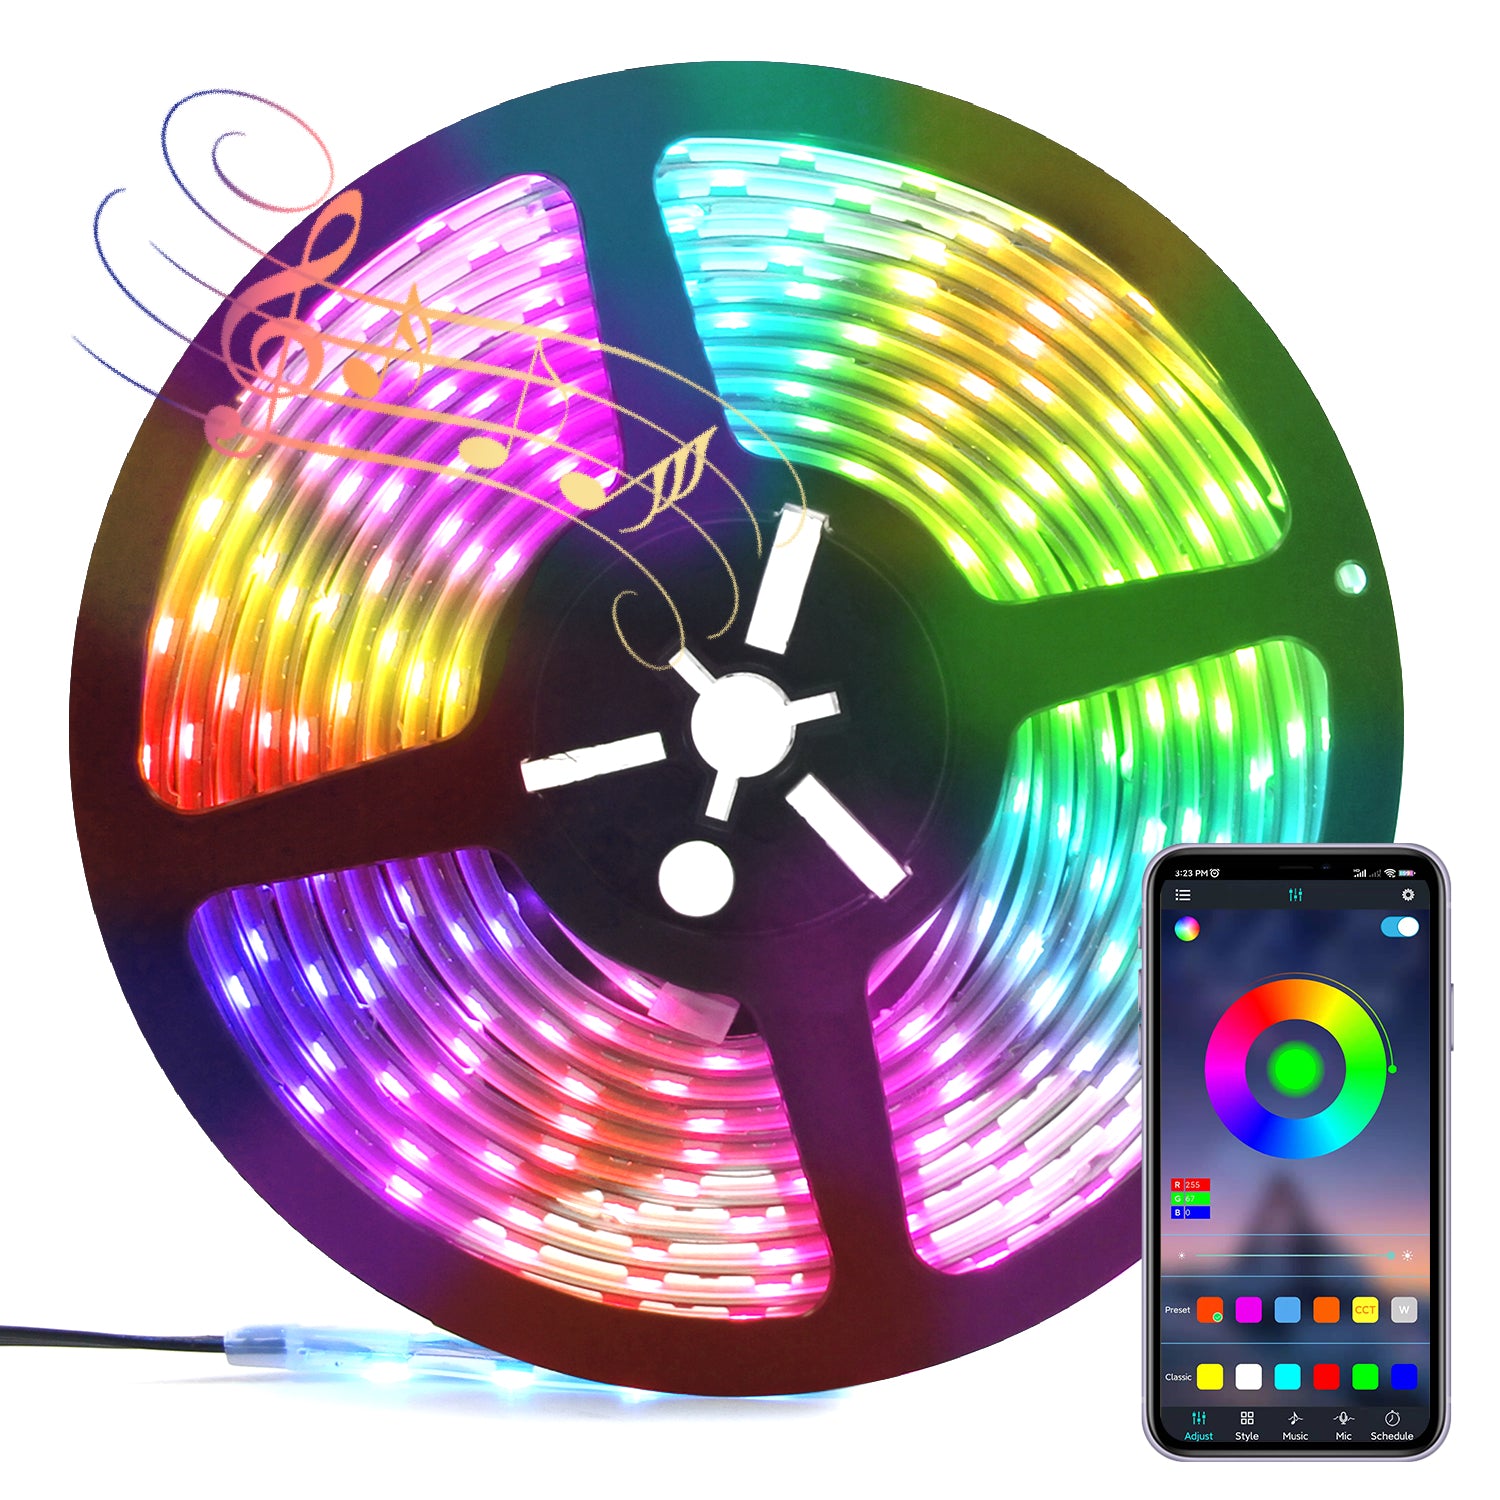 Send inquiry for 12V Waterproof RGB LED Strip Lights IP65 Smart App Control RGB Ribbon Light with Rechargeable Power Bank for Home, Bar Decoration to high quality RGB LED Strip Lights supplier. Wholesale Ribbon Light directly from China  RGB LED Strip Lights manufacturers/exporters. Get a factory sale price list and become a distributor/agent-vstled.com